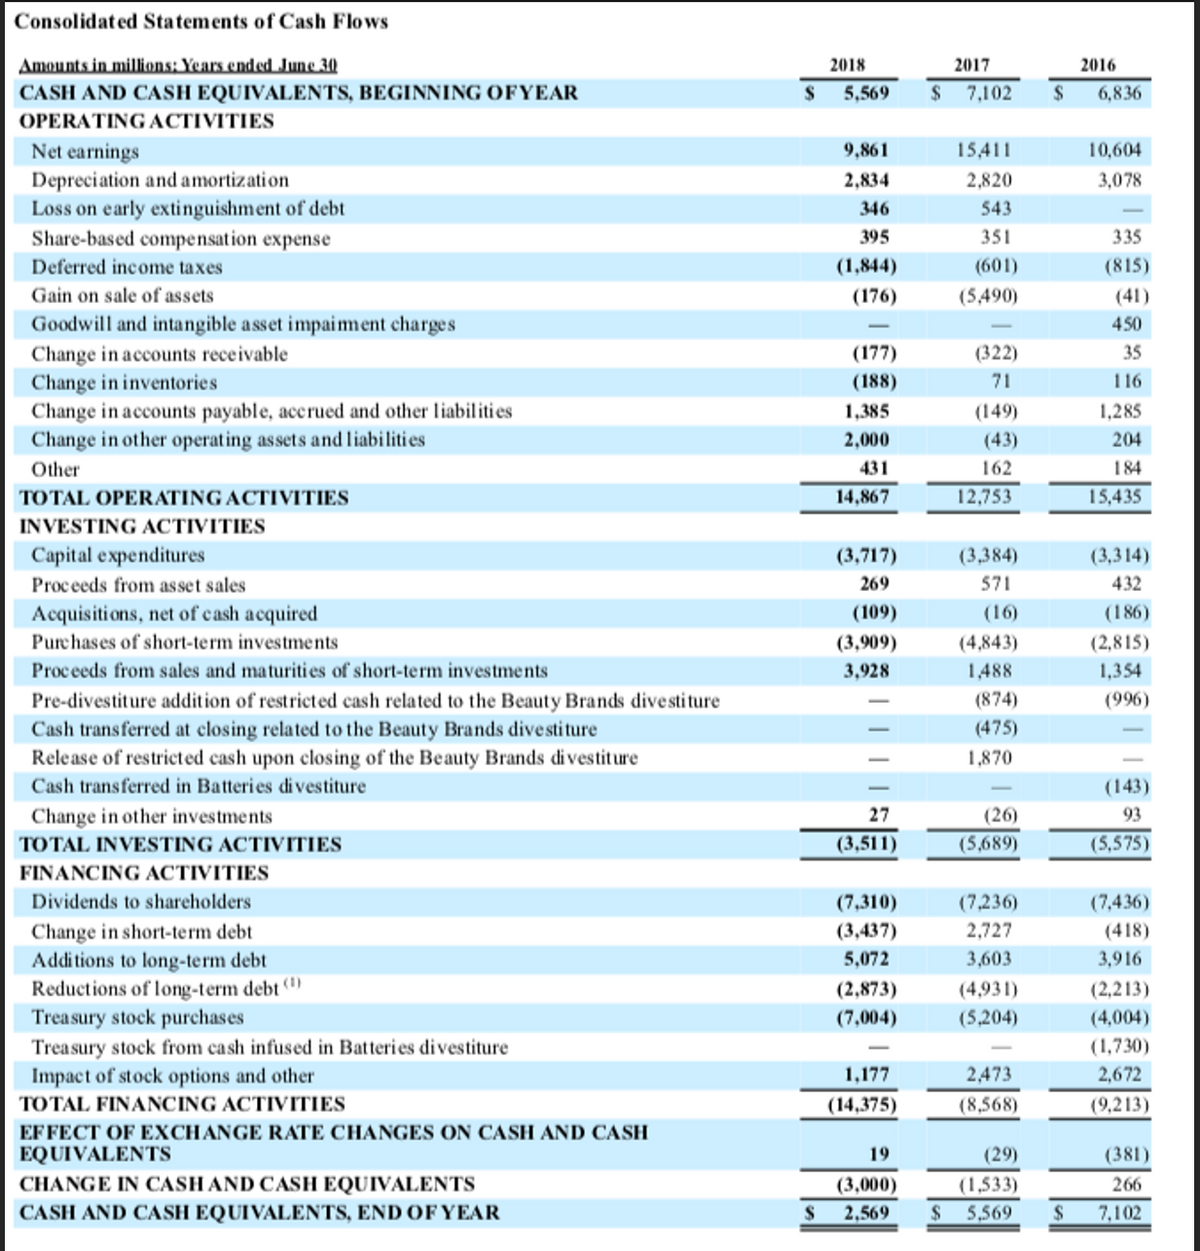 Consolidated Statements of Cash Flows
Amounts in millions: Years ended June 30
2018
2017
2016
CASH AND CASH EQUIVALENTS, BEGINNING OFYEAR
5.569
2$
7,102
$
6,836
OPERATING ACTIVITIES
15,411
10,604
Net earnings
Depreciation and amortization
Loss on early extinguishment of debt
Share-based compensation expense
9,861
2,834
2,820
3,078
346
543
395
351
335
Deferred income taxes
(1,844)
(601)
(815)
Gain on sale of assets
(176)
(5,490)
(41)
Goodwill and intangible asset impaiment charges
450
Change in accounts receivable
Change in inventories
Change in accounts payable, accrued and other liabilities
Change in other operating assets and liabilities
Other
(177)
(322)
35
(188)
71
116
1,385
(149)
1,285
2,000
(43)
204
431
162
184
TOTAL OPERATING ACTIVITIES
14,867
12,753
15,435
INVESTING ACTIVITIES
Capital expenditures
(3,717)
(3,384)
(3,314)
Proceeds from asset sales
269
571
432
Acquisiti ons, net of cash acquired
(109)
(16)
(186)
Purchases of short-term investments
(3,909)
(4,843)
(2,815)
Proceeds from sales and maturities of short-term investments
3,928
1,488
1,354
Pre-divestiture addition of restricted cash related to the Beauty Brands divestiture
Cash transferred at closing related to the Beauty Brands divesti ture
Release of restricted cash upon closing of the Beauty Brands divestiture
(874)
(996)
(475)
1,870
Cash transferred in Batteries divestiture
(143)
Change in other investments
27
(26)
93
TOTAL INVESTING ACTIVITIES
(3,511)
(5,689)
(5,575)
FINANCING ACTIVITIES
Dividends to shareholders
(7,310)
(7,236)
(7,436)
Change in short-term debt
Additions to long-term debt
Reductions of long-term debt ()
Trea sury stock purchases
Treasury stock from cash infused in Batteries divestiture
Impact of stock options and other
(3,437)
2,727
(418)
5,072
3,603
3,916
(2,873)
(4,931)
(2,213)
(7,004)
(5,204)
(4,004)
(1,730)
1,177
2,473
2,672
TOTAL FINANCING ACTIVITIES
(14,375)
(8,568)
(9,213)
EFFECT OF EXCHANGE RATE CHANGES ON CASH AND CASH
EQUIVALENTS
19
(29)
(381)
CHANGE IN CASHAND CASH EQUIVALENTS
(3,000)
(1,533)
266
CASH AND CASH EQUIVALENTS, END OF YEAR
2,569
$ 5,569
7,102
